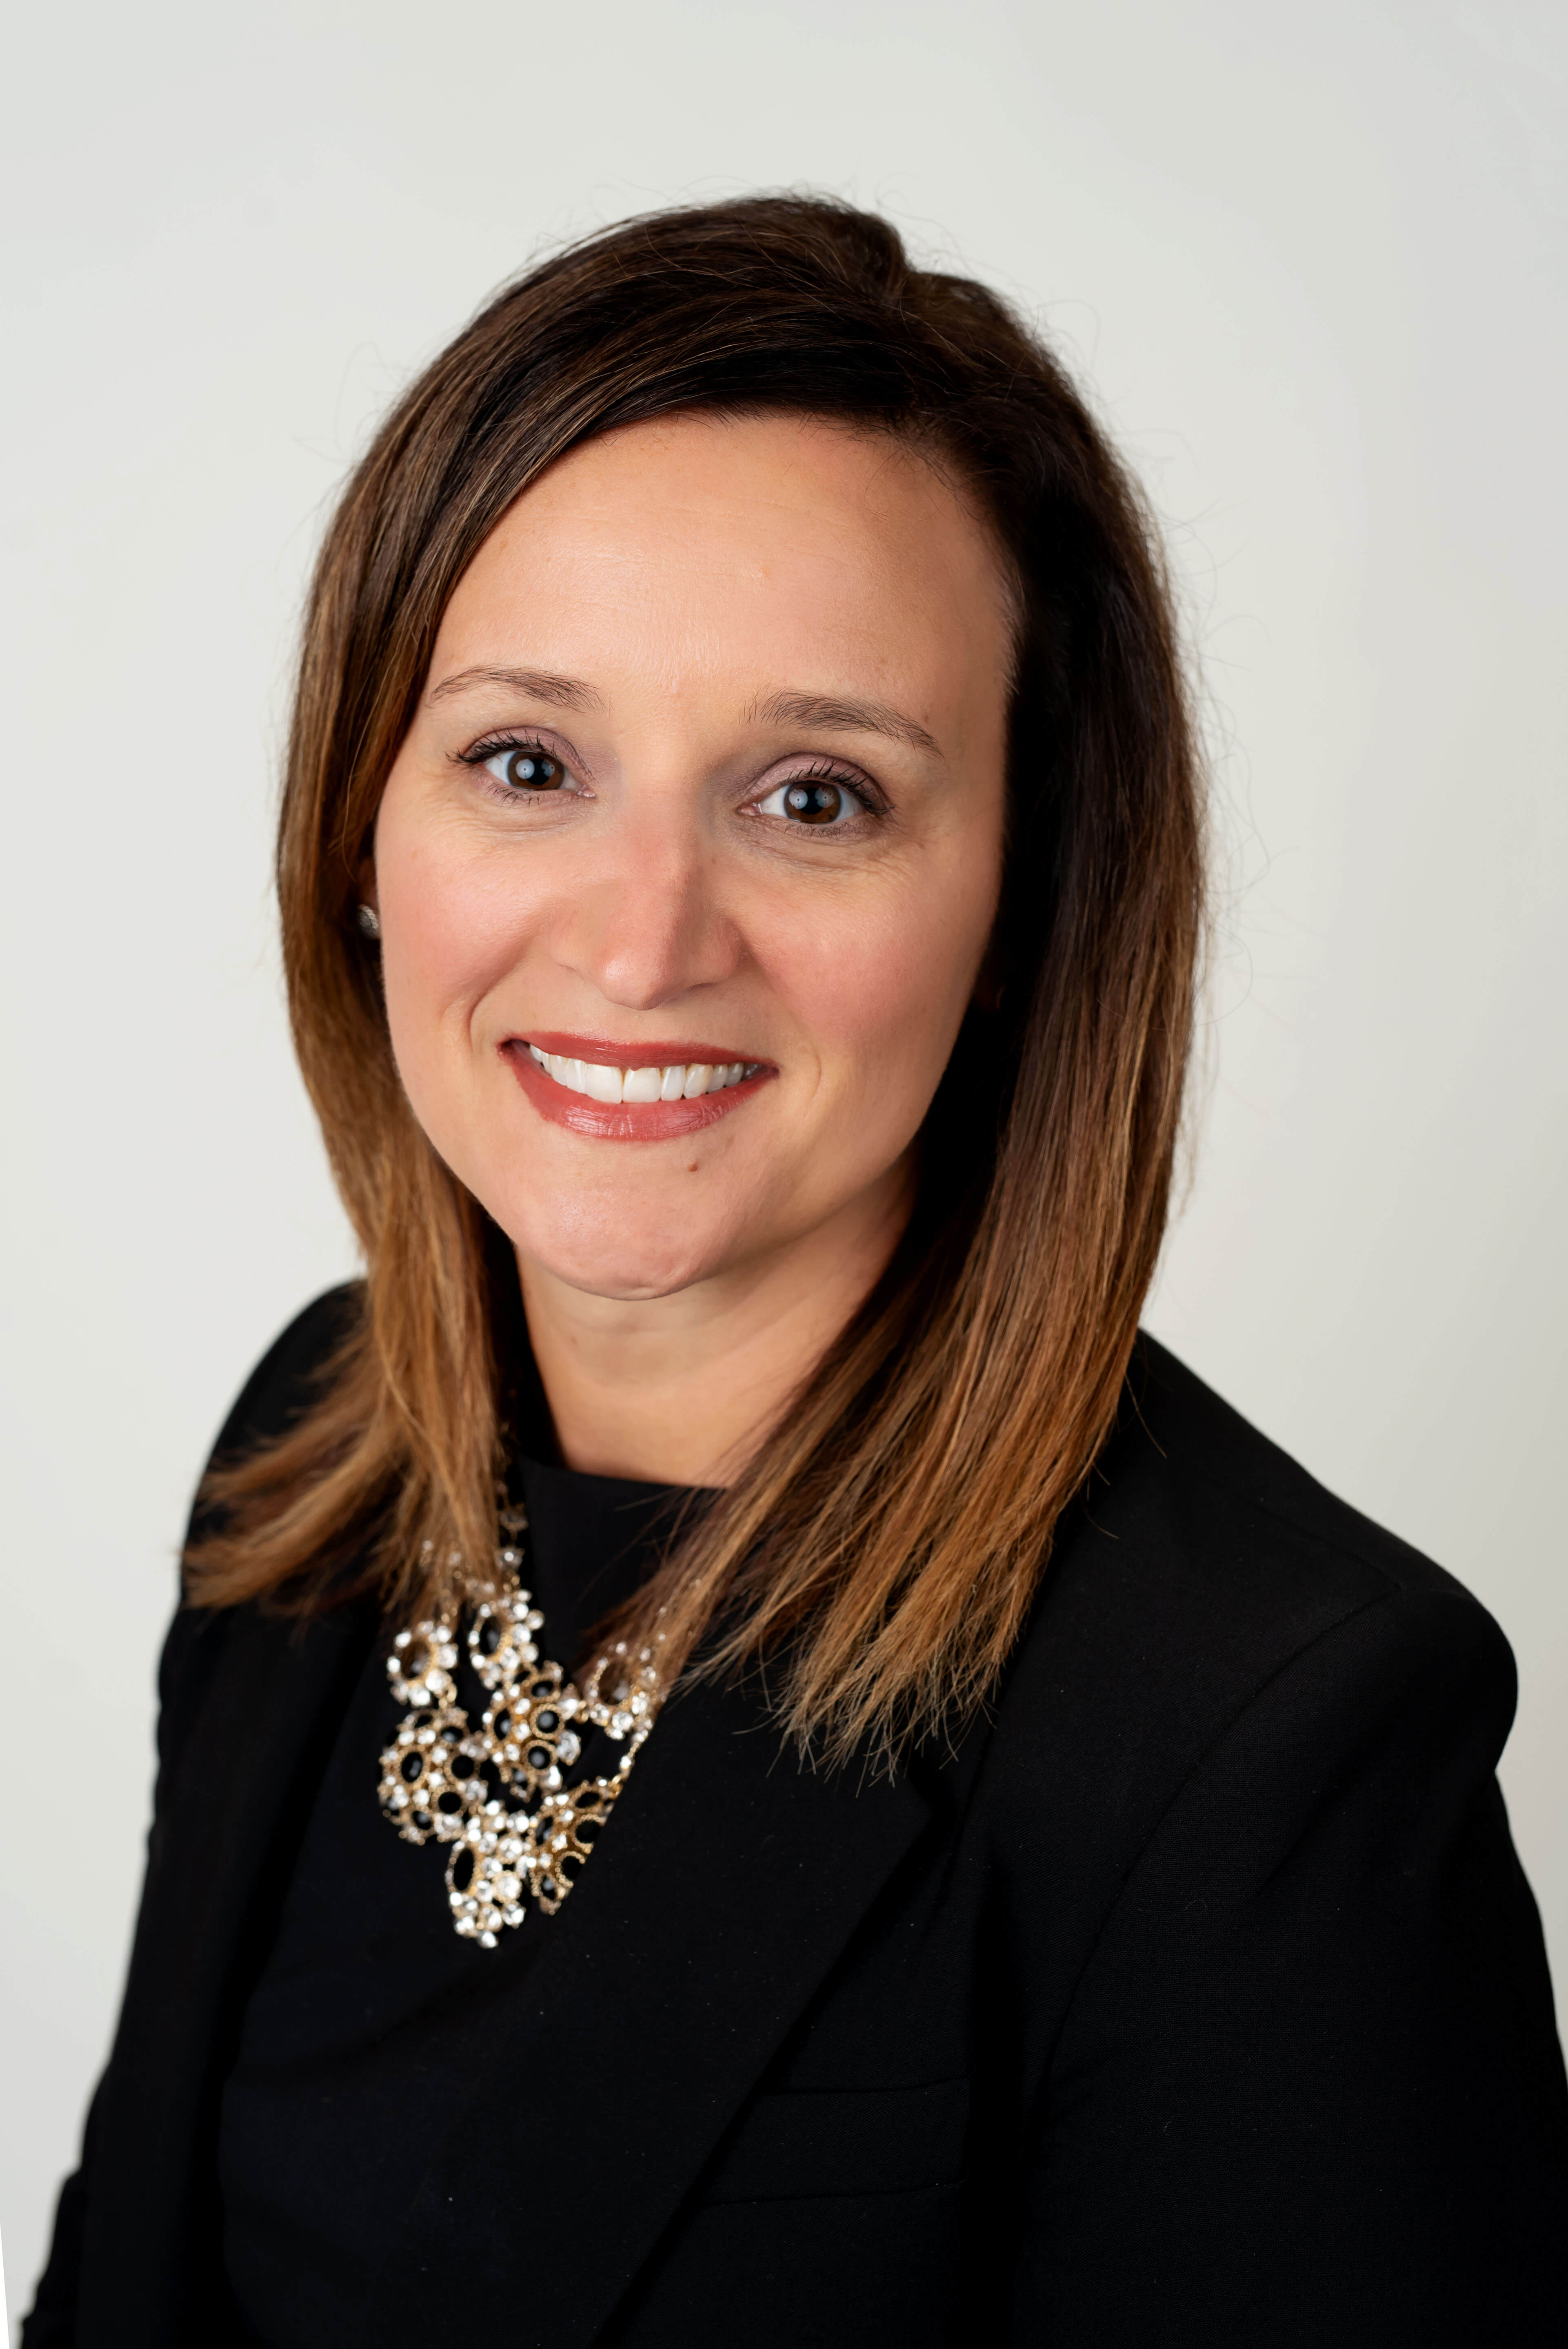 Kelly Loeffler Joins CNSI as Vice President of Deals, Strategy & Capture